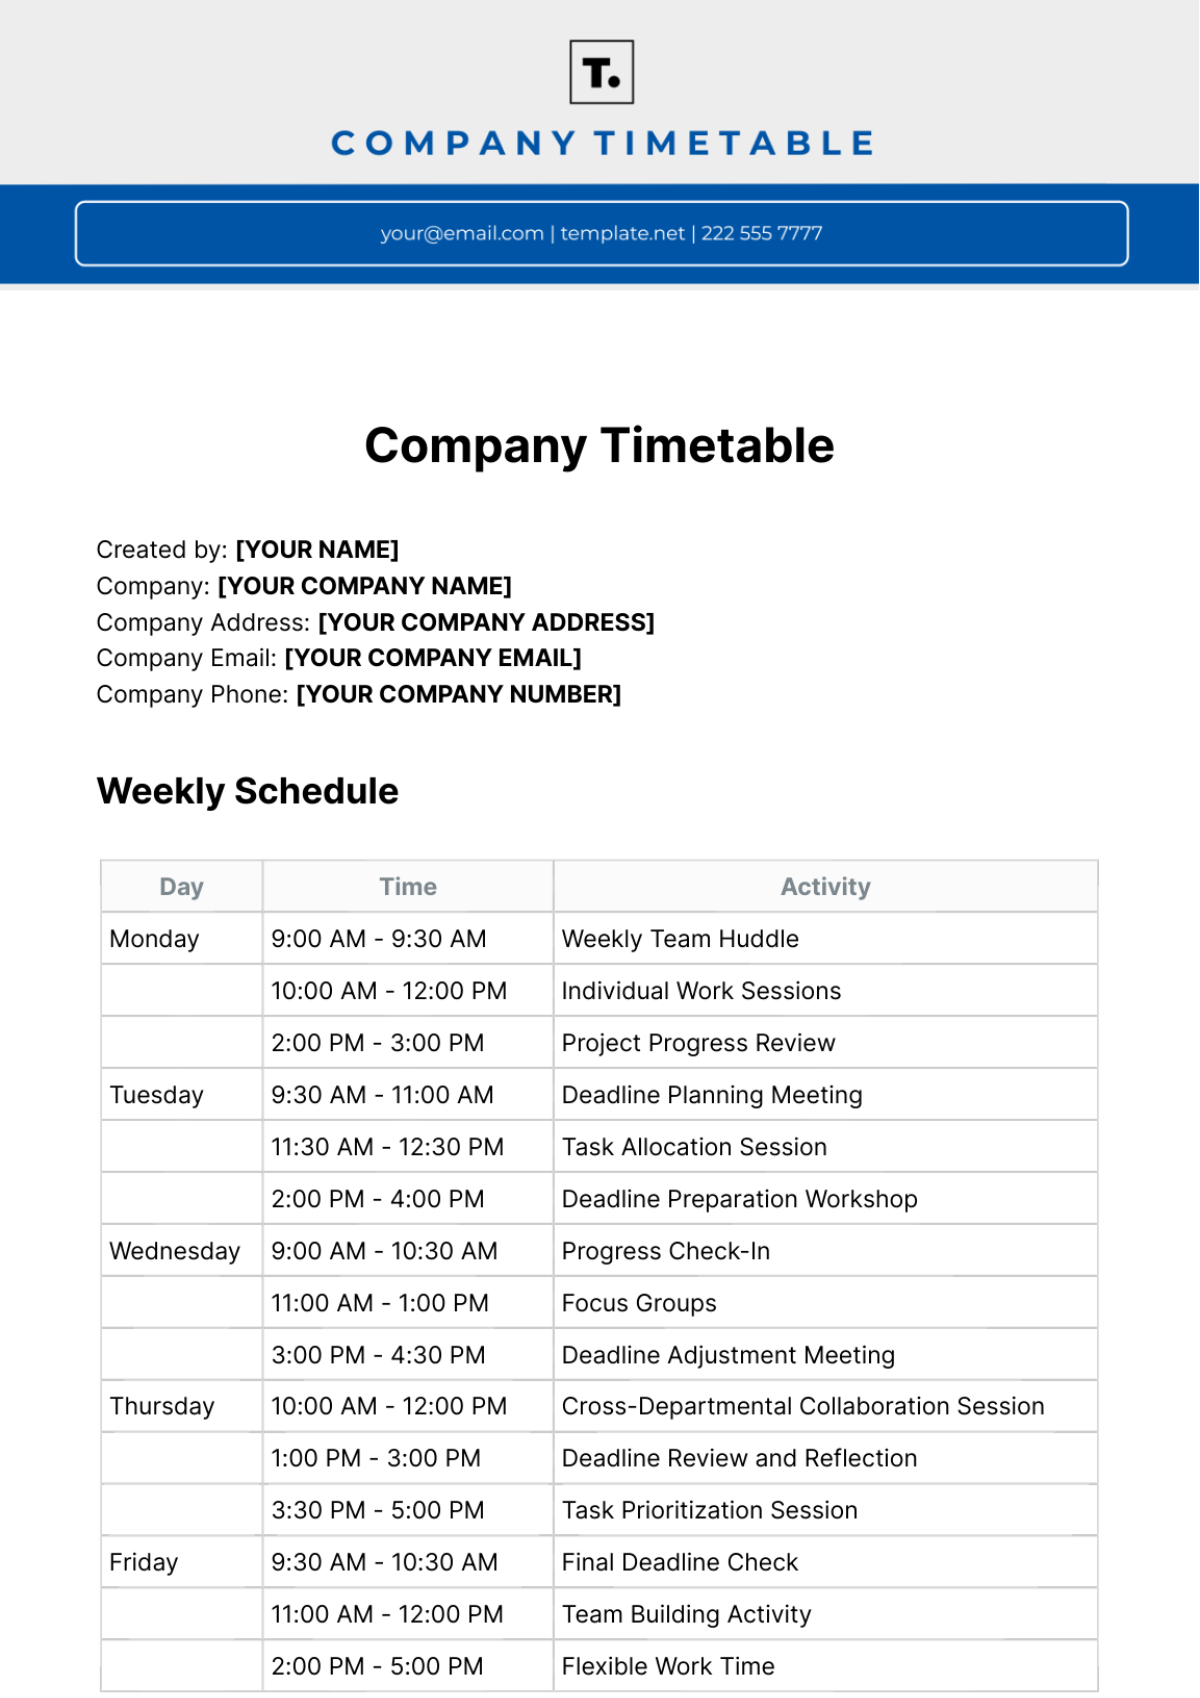 Company Timetable Template